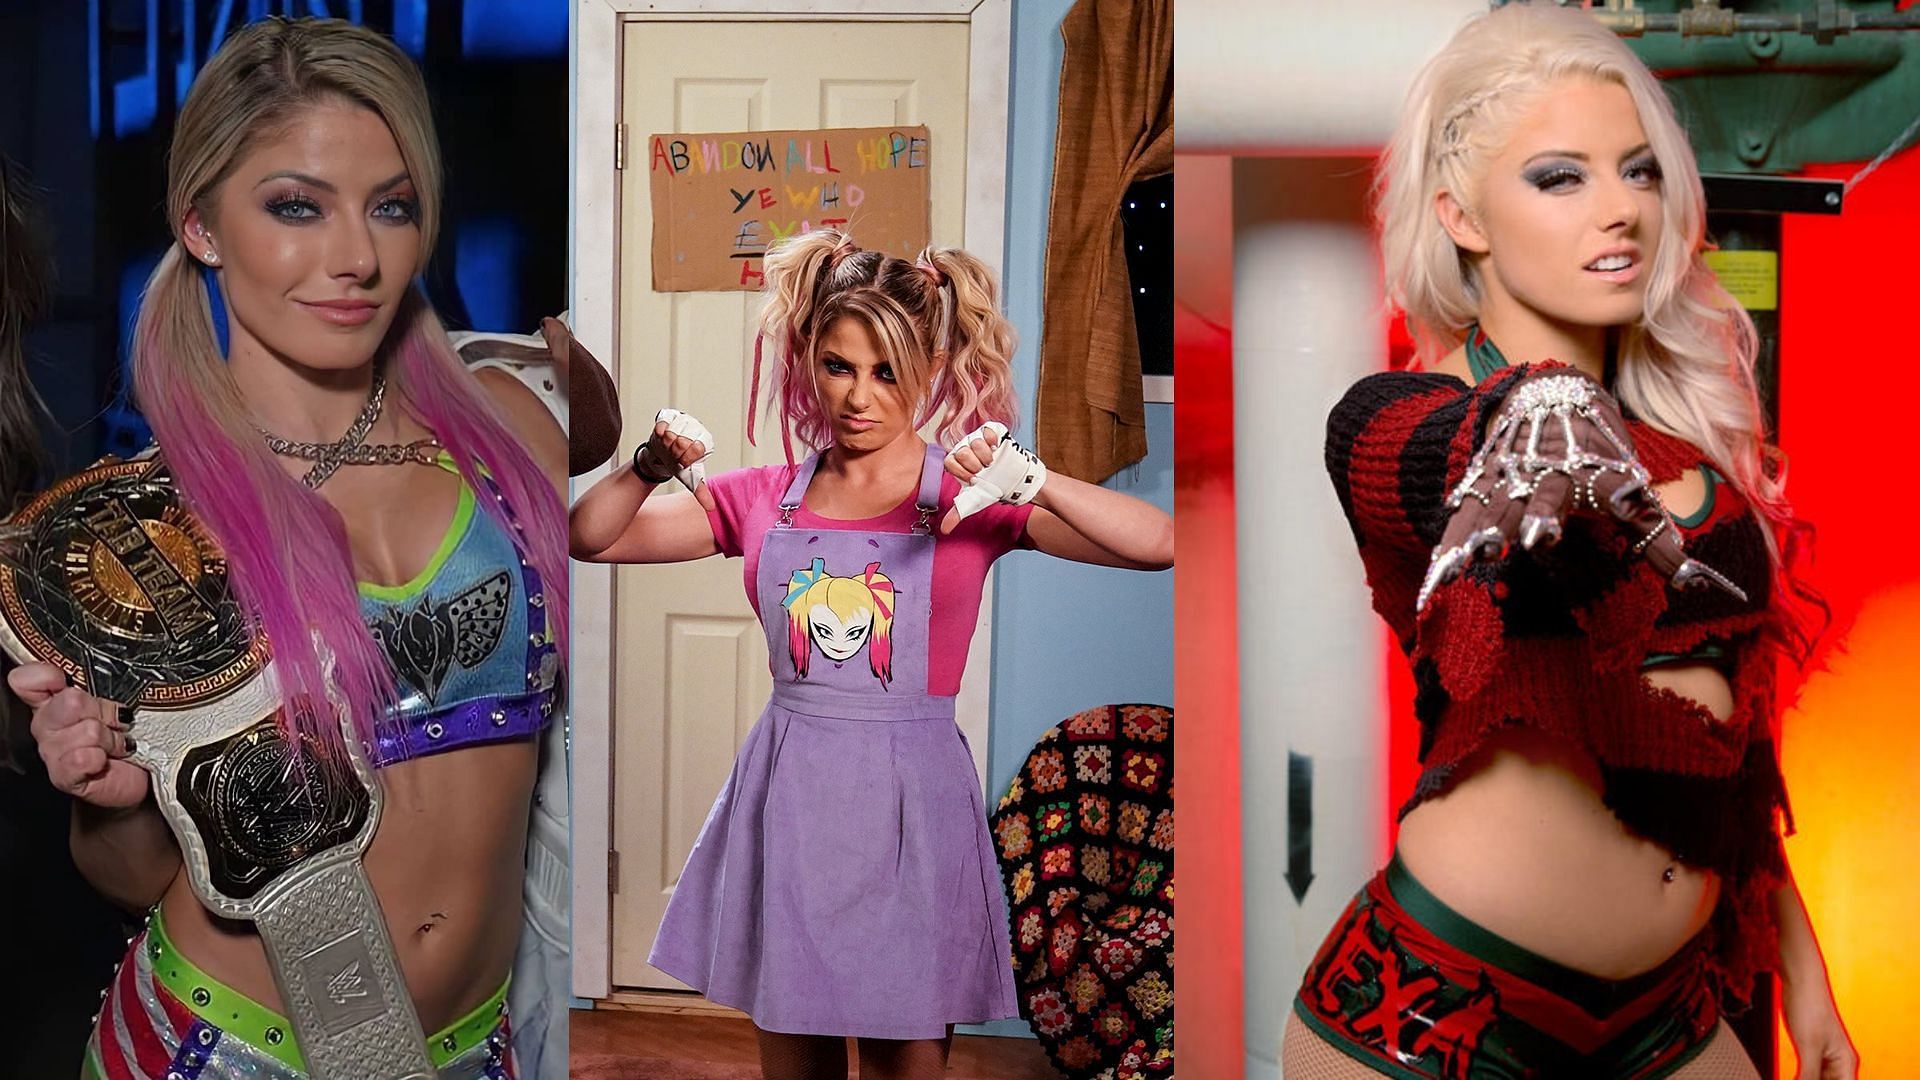 Alexa Bliss has introduced some fantastic gear over the years